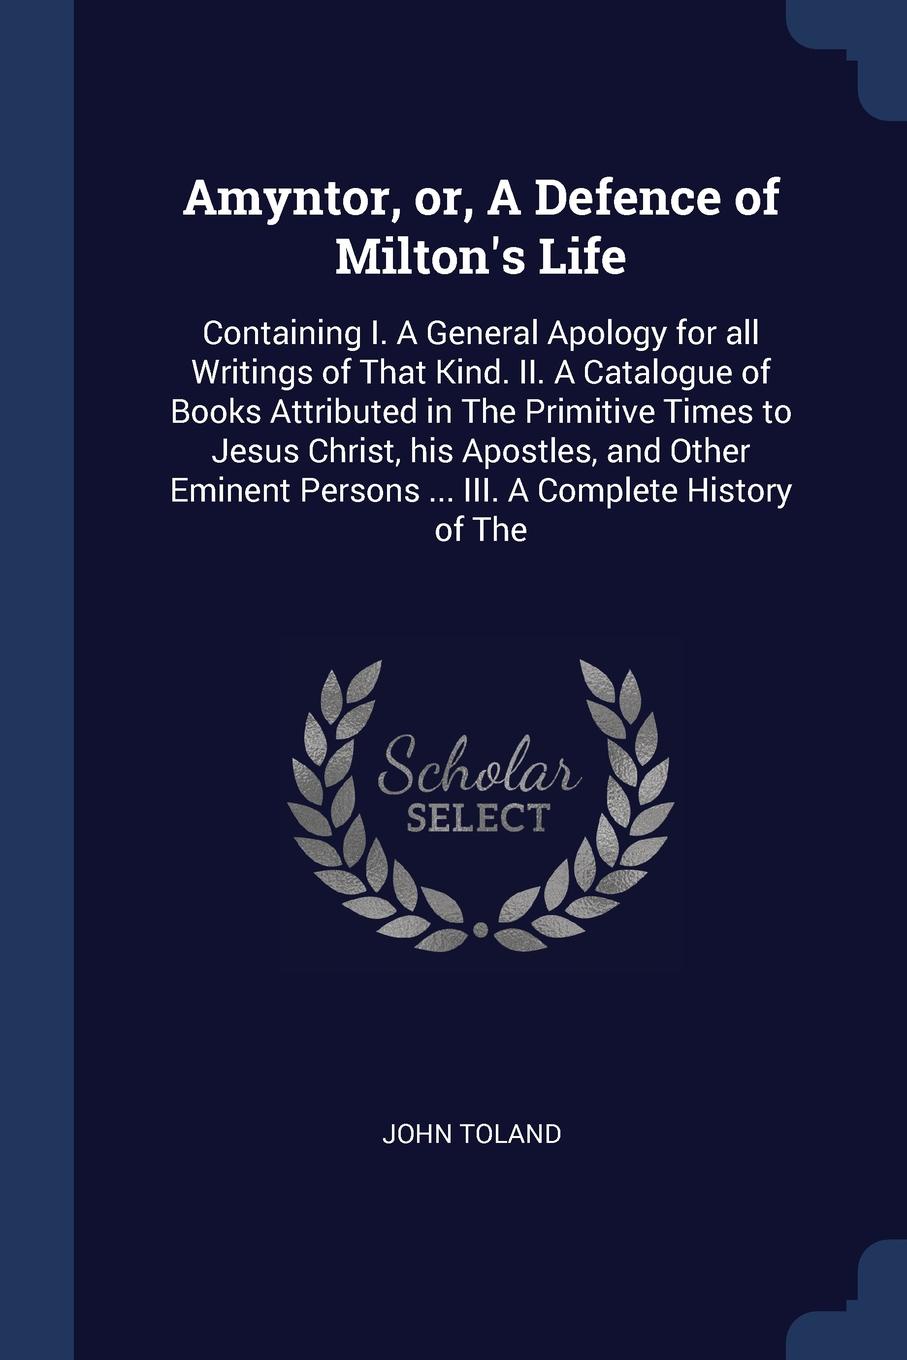 Amyntor, or, A Defence of Milton`s Life. Containing I. A General Apology for all Writings of That Kind. II. A Catalogue of Books Attributed in The Primitive Times to Jesus Christ, his Apostles, and Other Eminent Persons ... III. A Complete History...